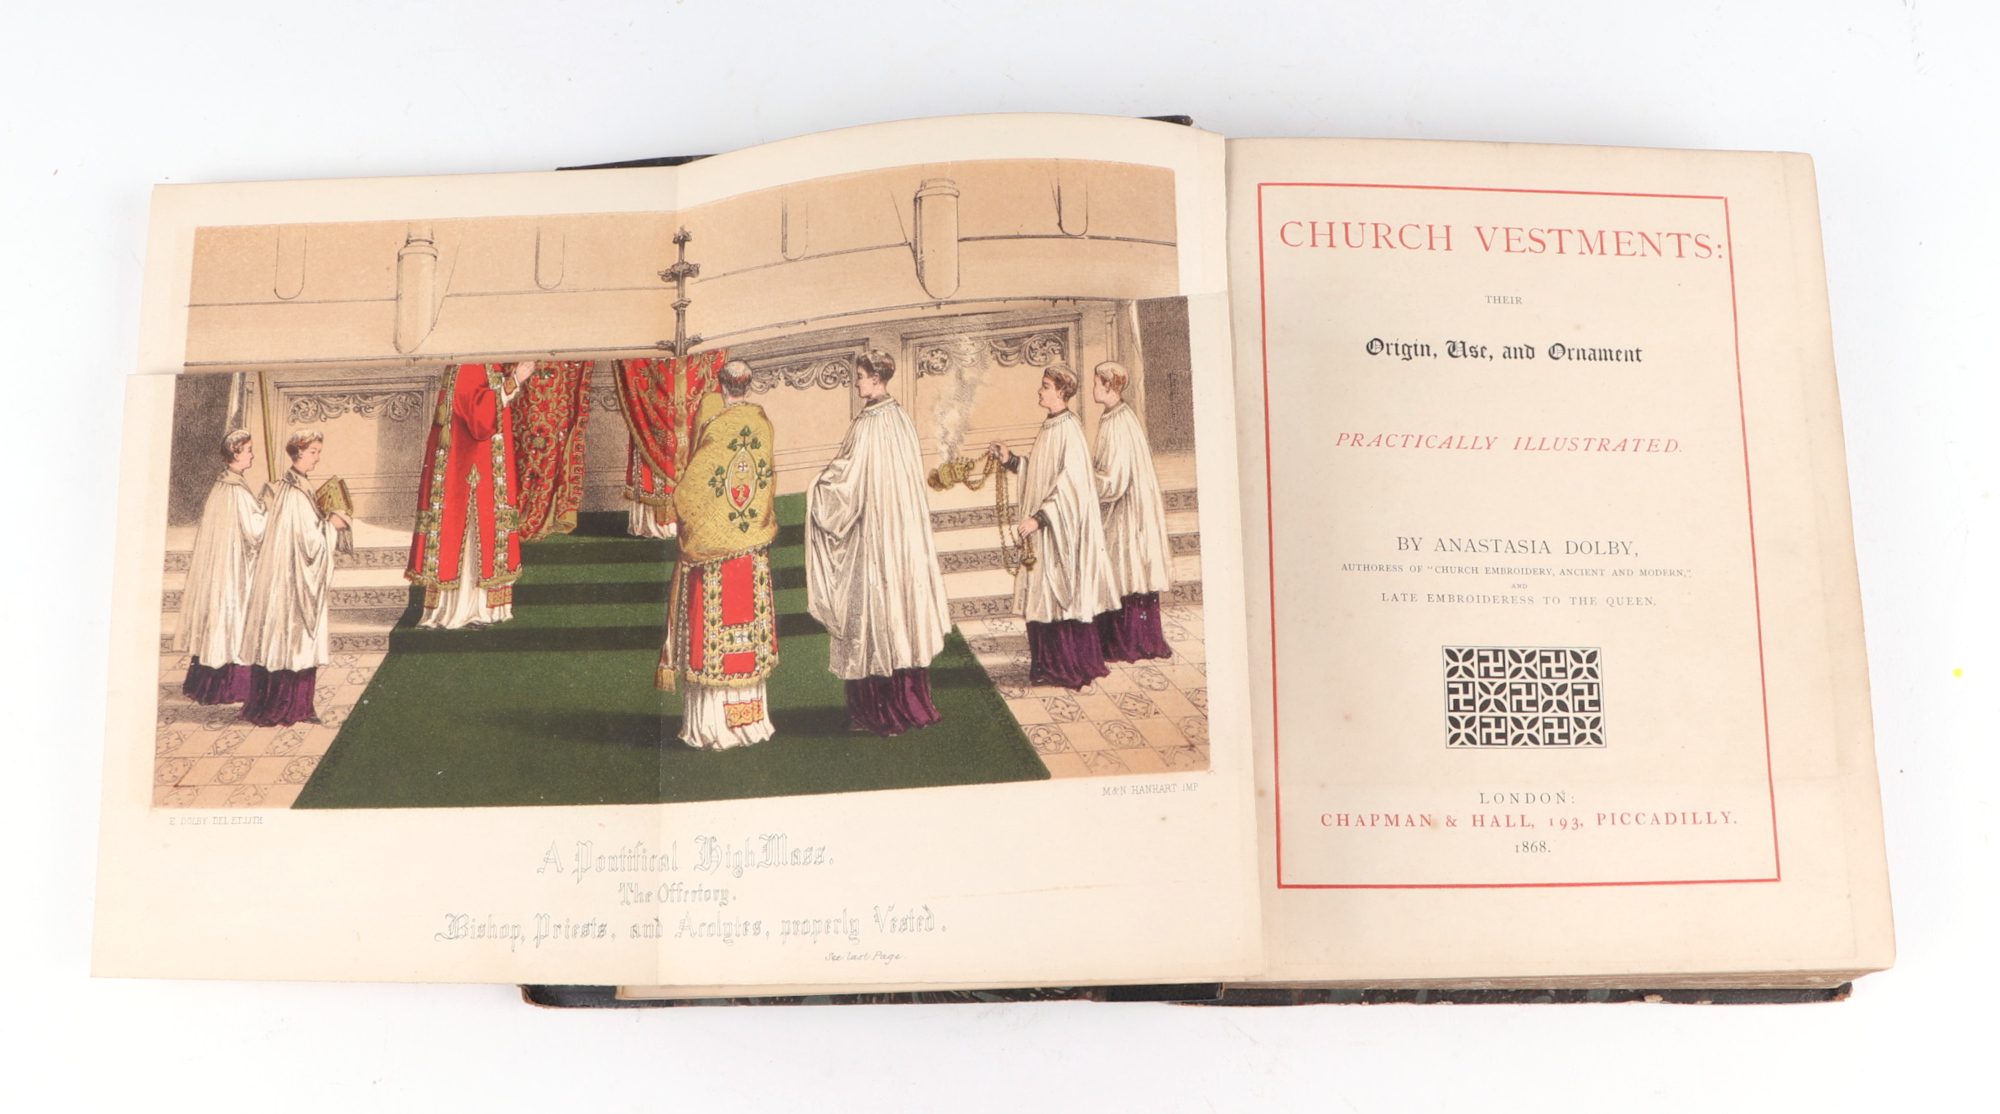 Dolby (Anastasia) Church Vestments their origin, use and ornament, practically illustrated, - Image 3 of 5